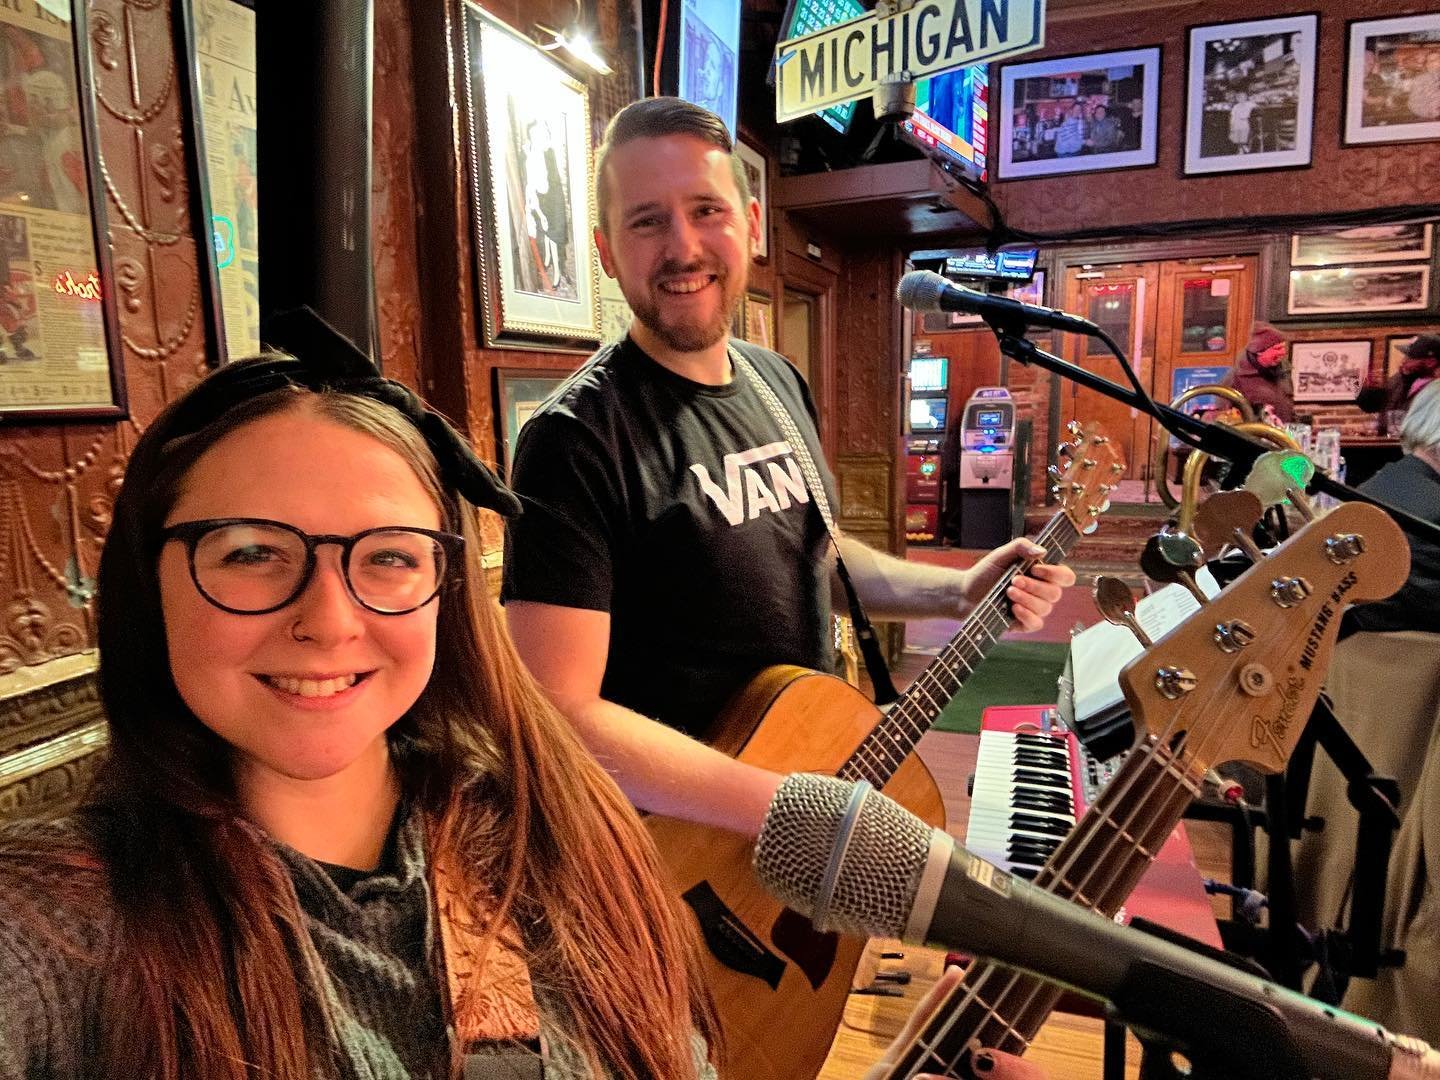 Pinter Whitnick will team up with Matthew Shannon for a special trio performance at BAD Brewing Co.'s St. Baddy's Day celebration 4 to 7 p.m. Saturday.